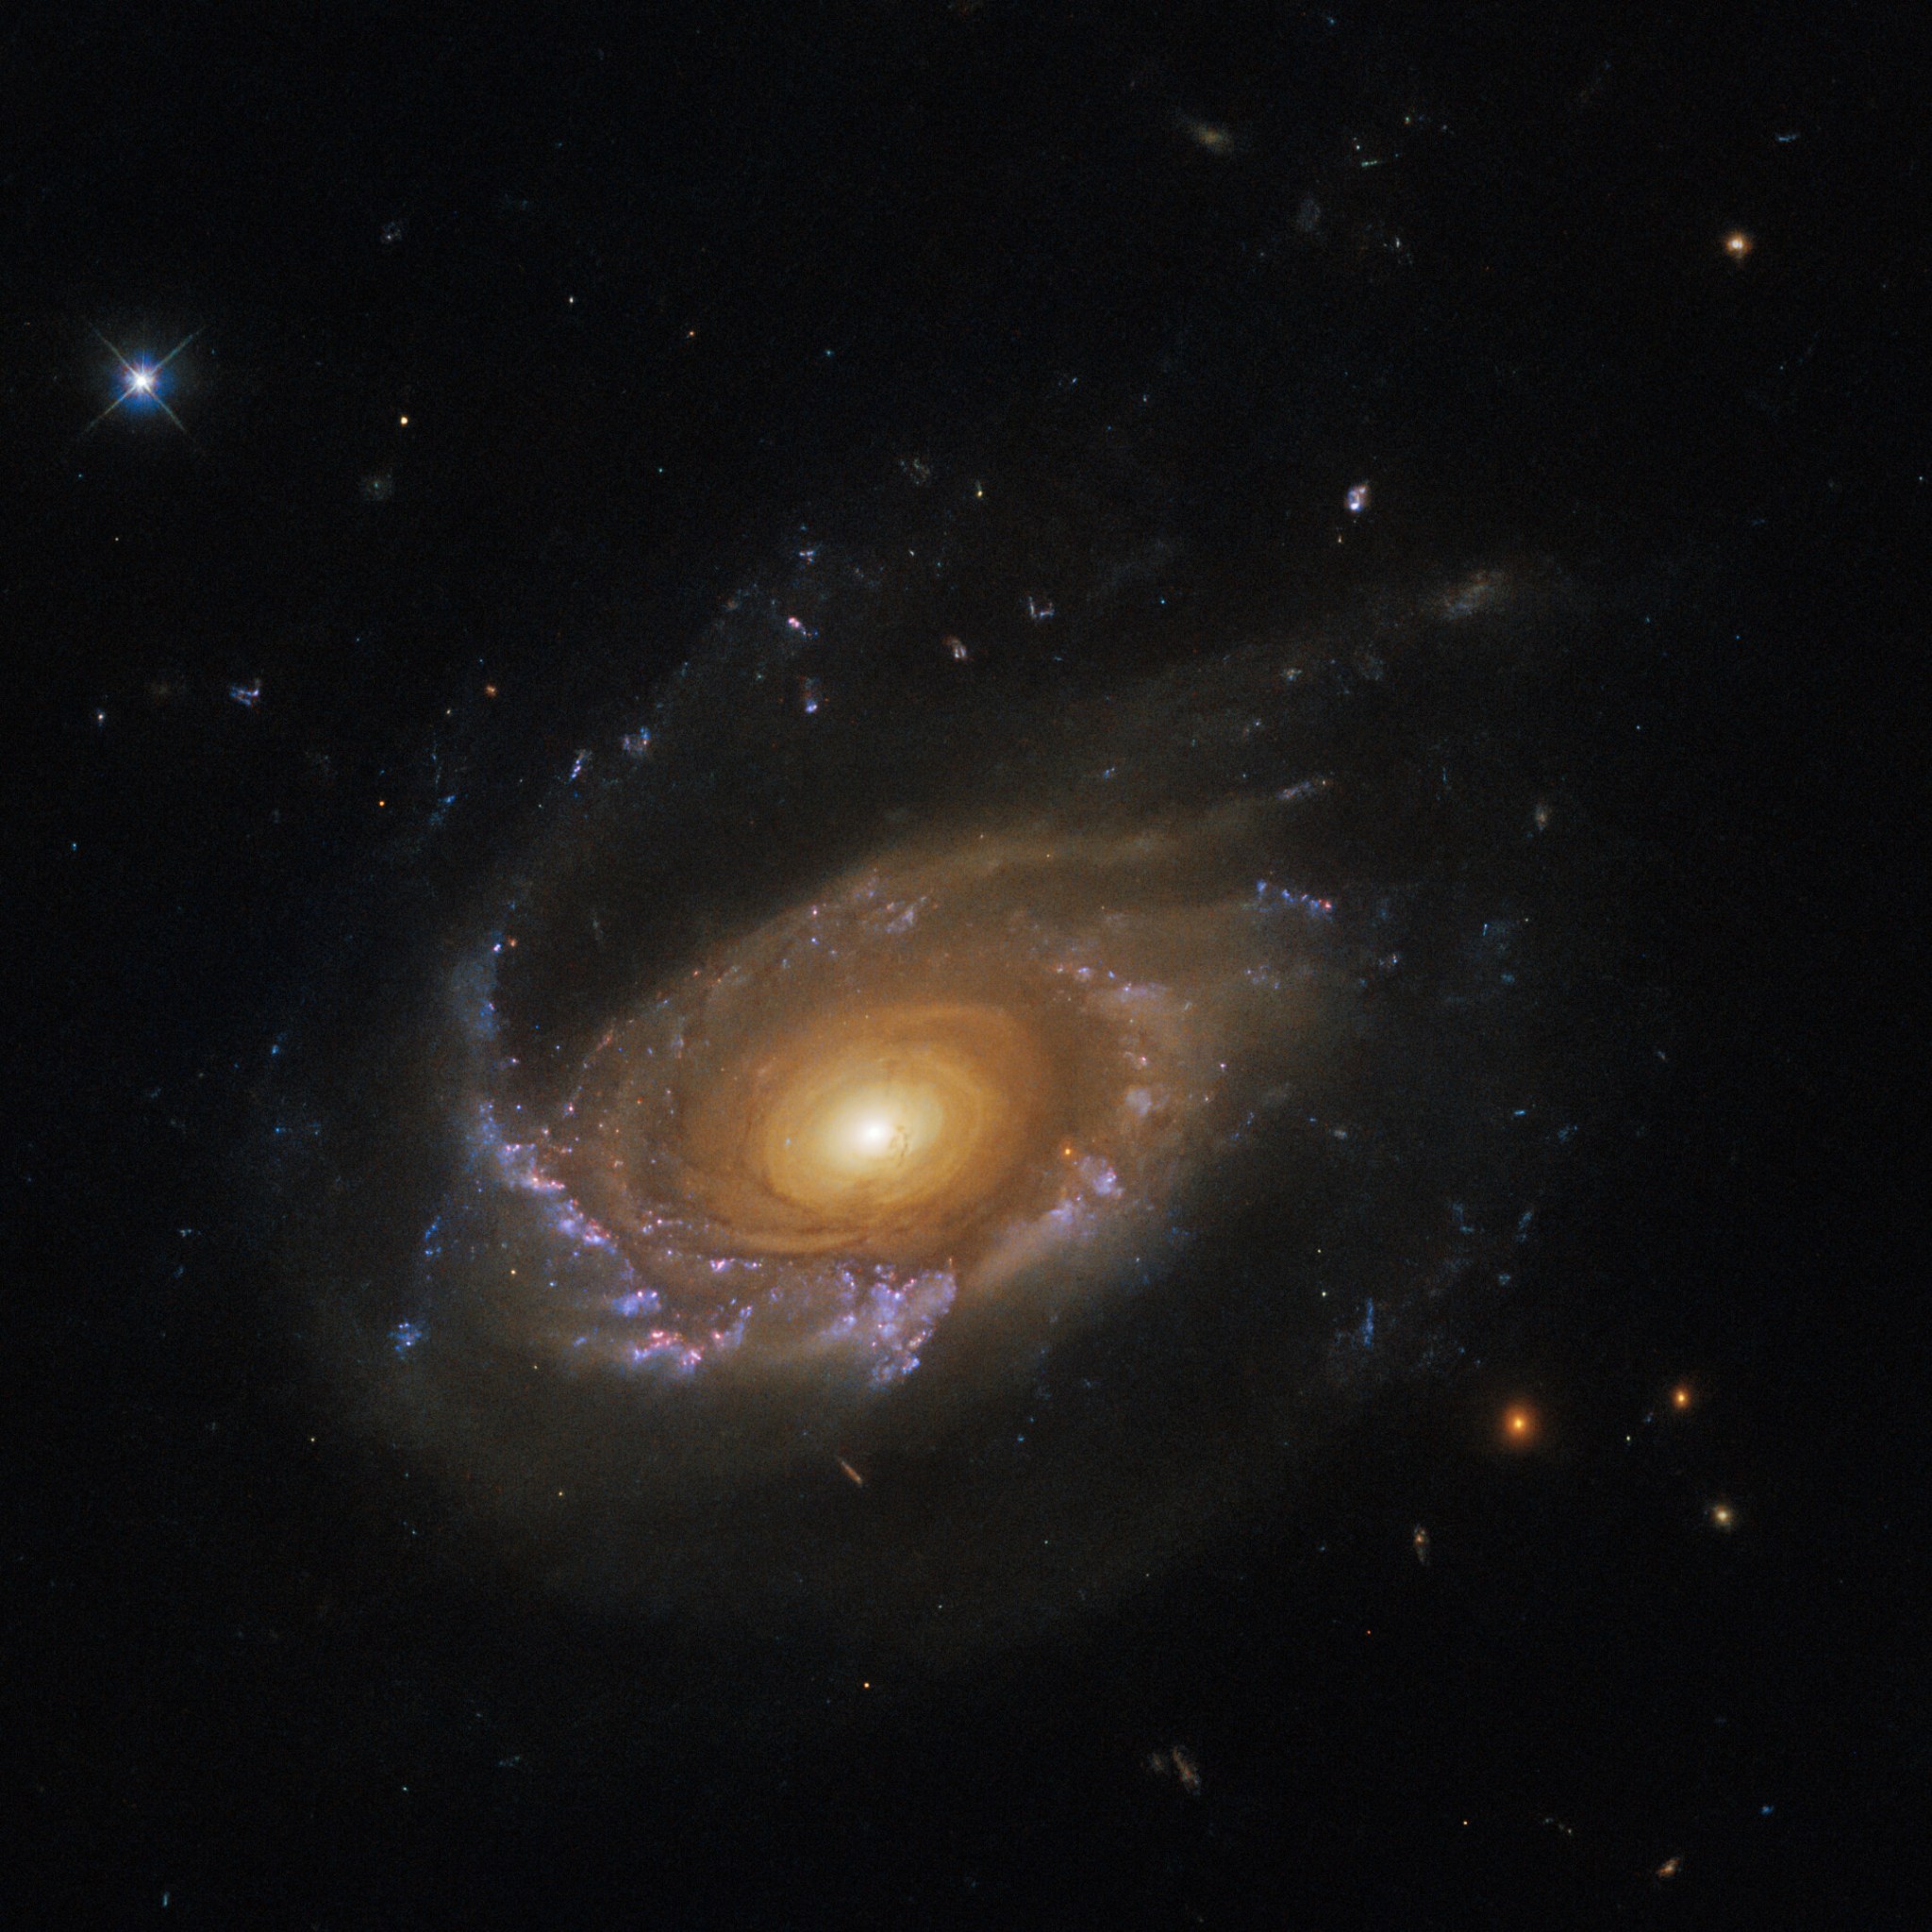 Large spiral galaxy at center. Its core surrounded by concentric rings of dark and light dust. Its spiral arms hold grey dust and blue areas of star formation. Part of the arm is drawn out above the galaxy. Dust from the arm trails off to the right.